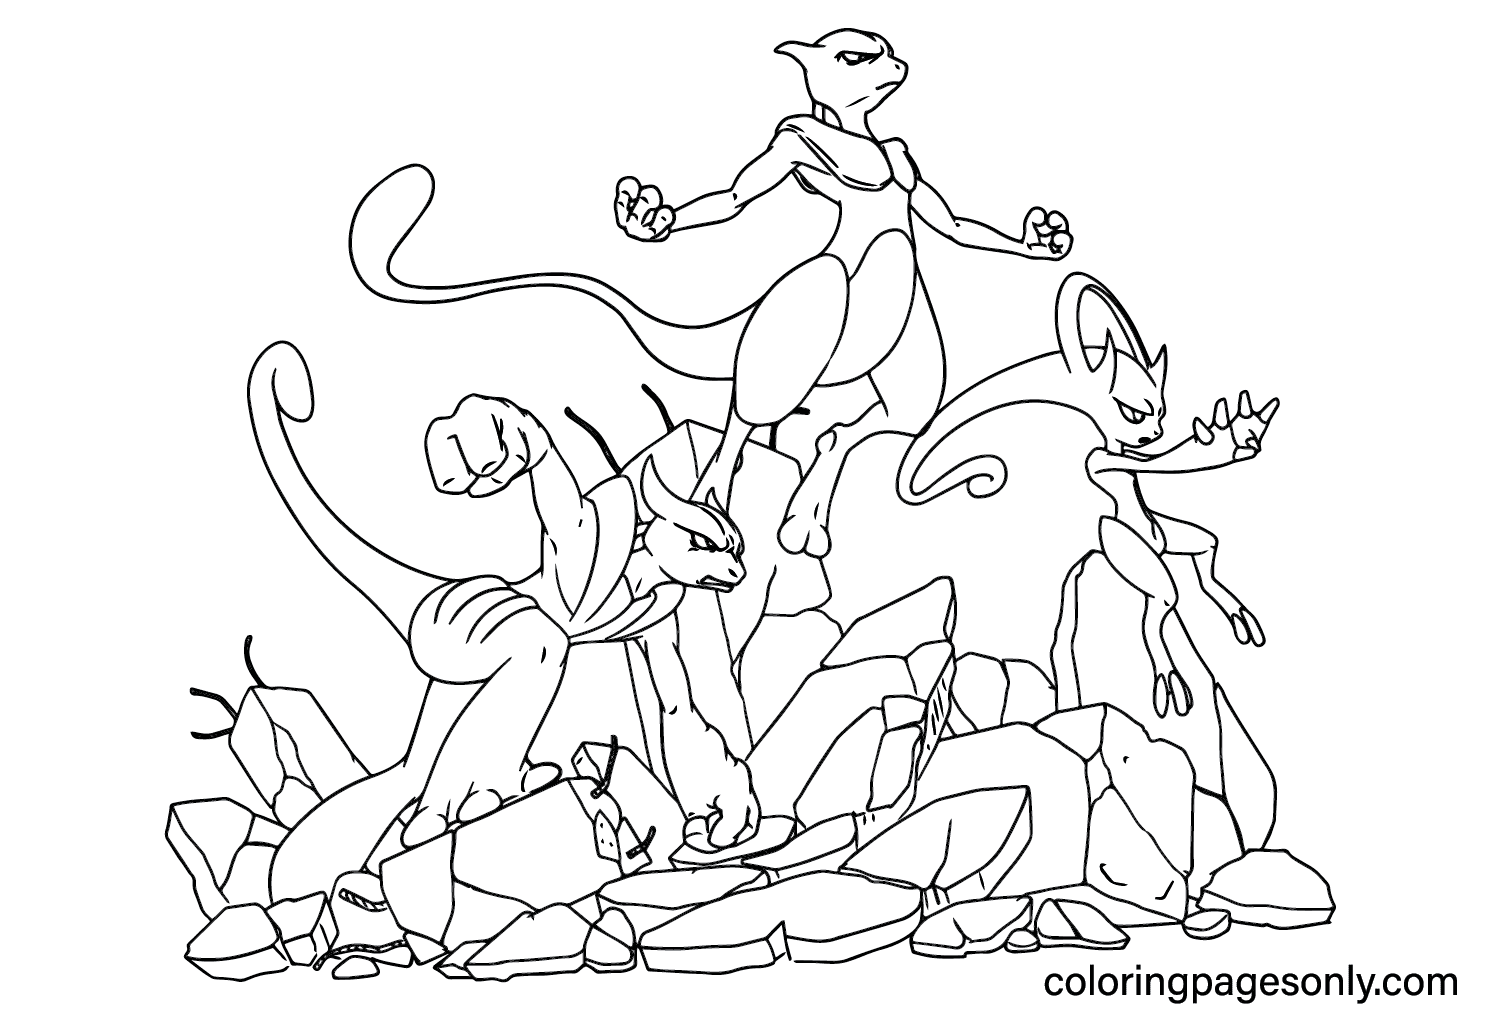 Mewtwo and Mega Mewtwo Coloring Page from Mewtwo